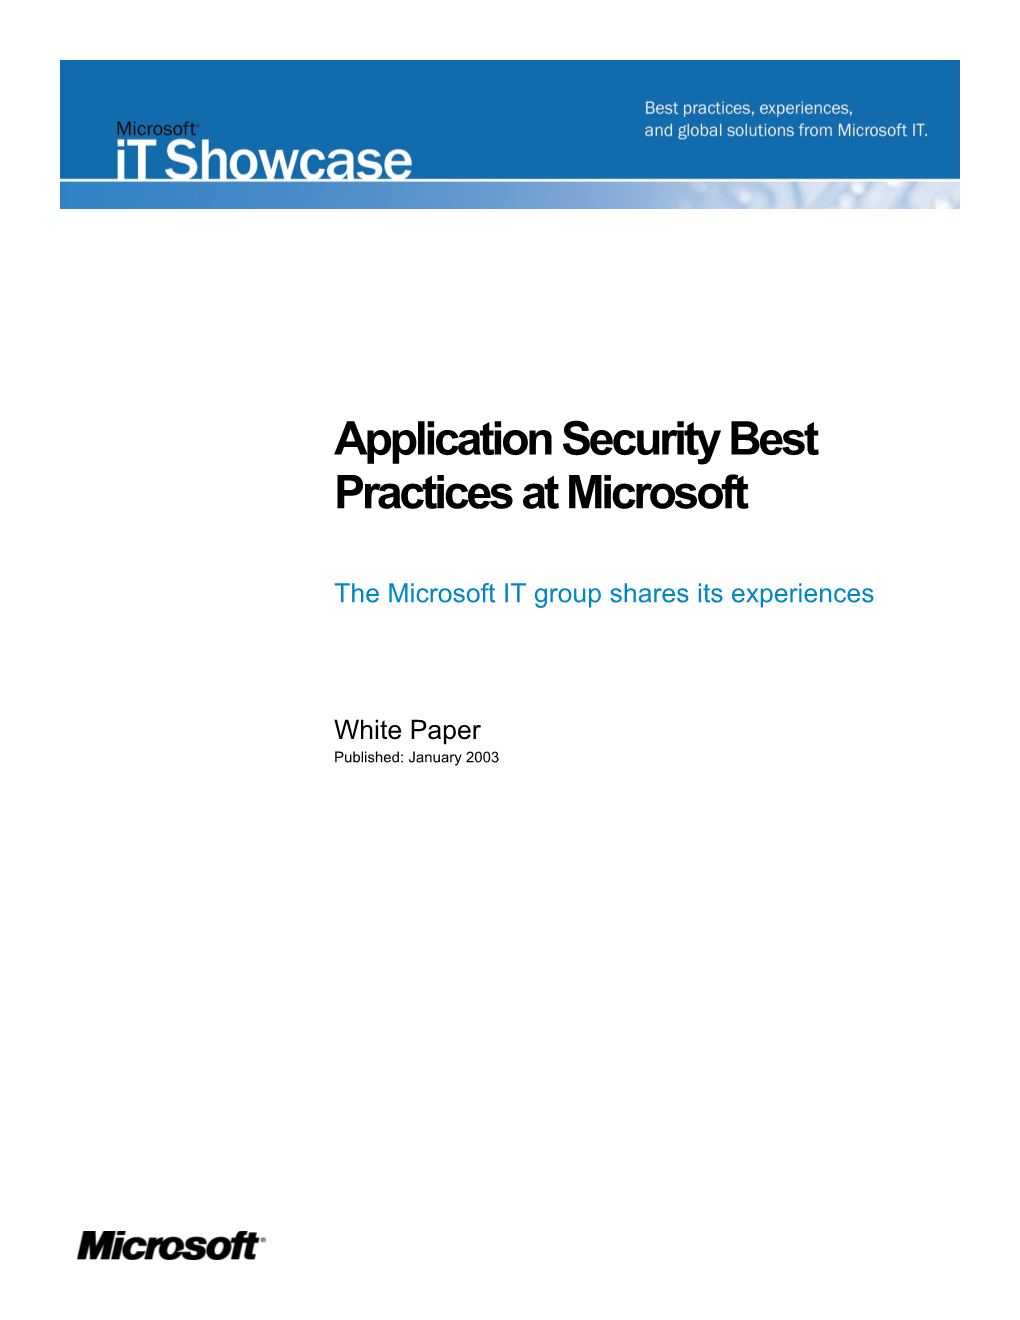 Application Security Best Practices at Microsoft